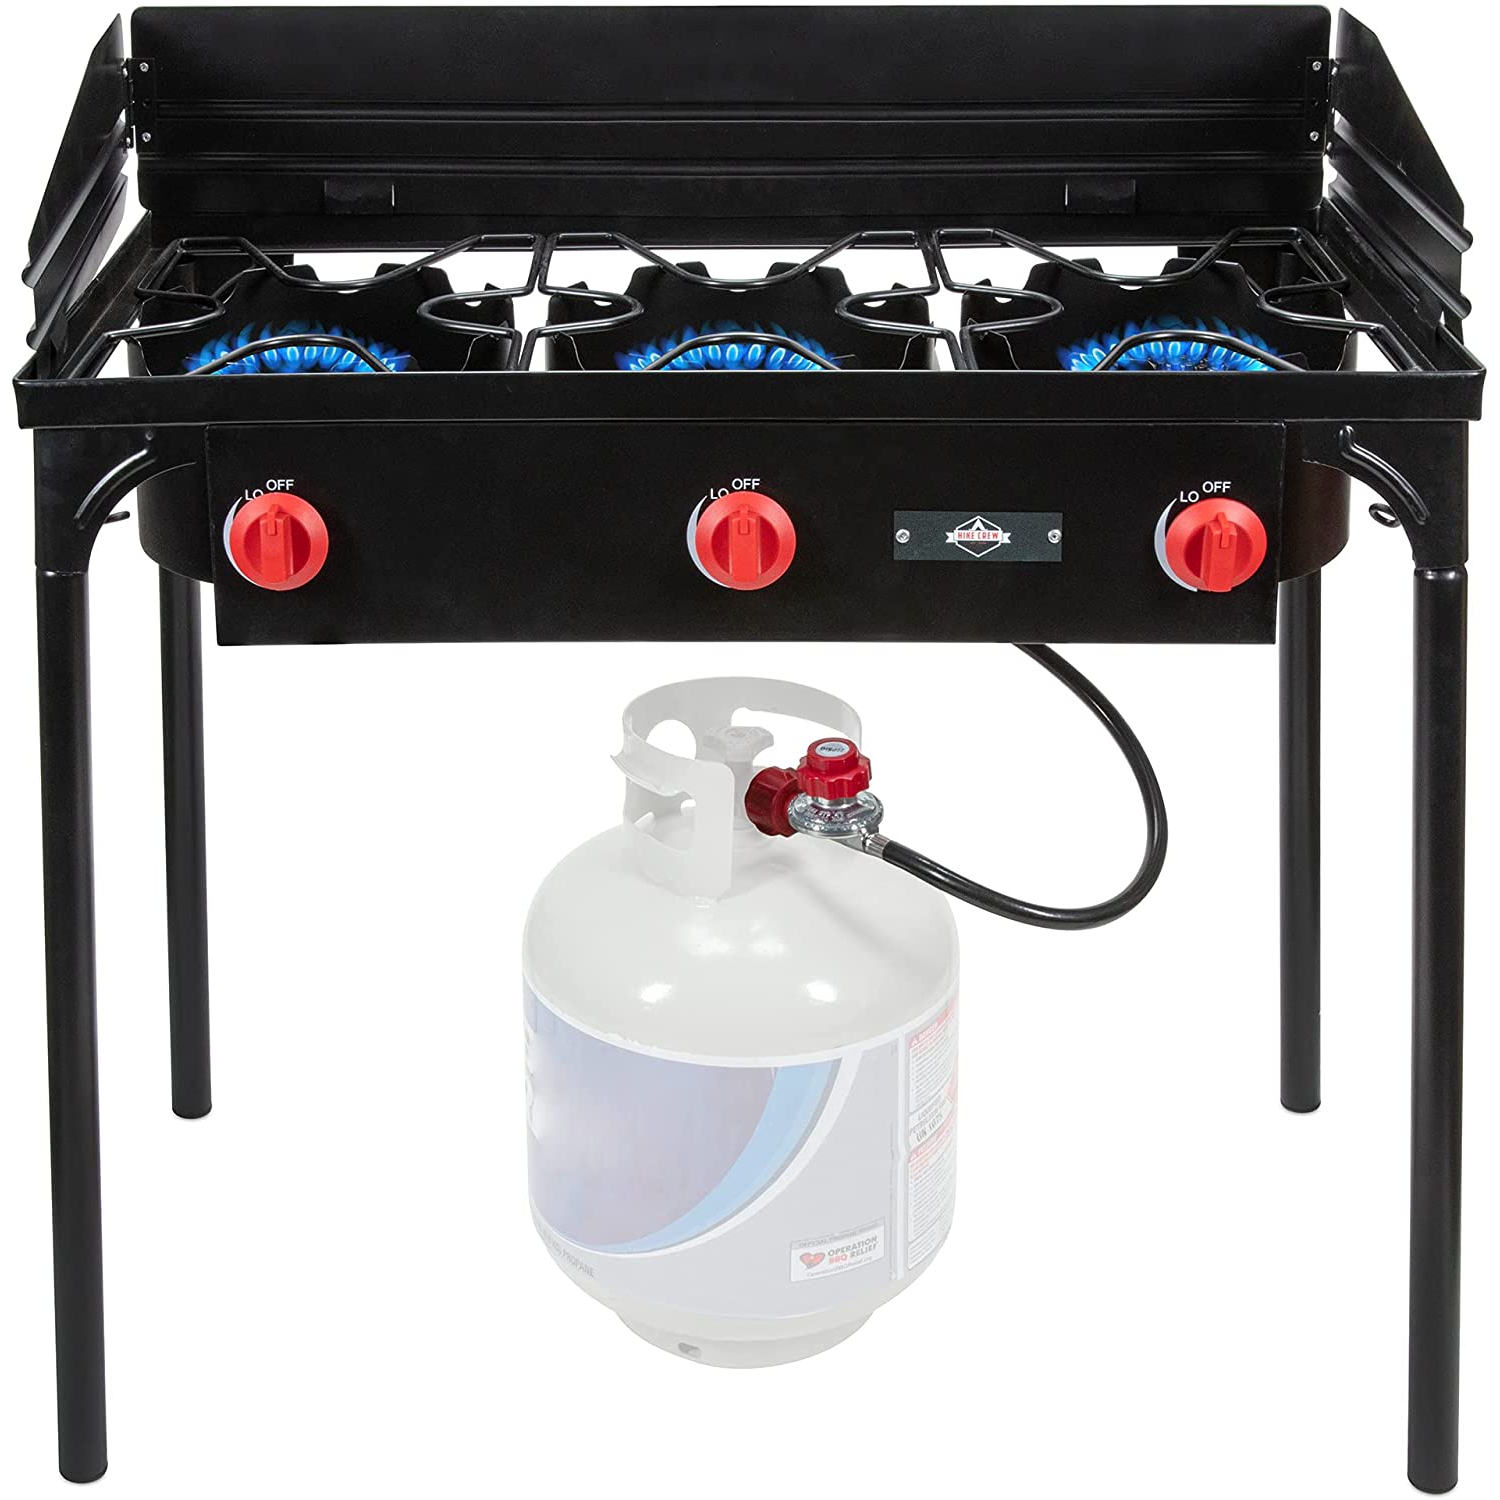 Hike Crew Cast Iron 3-Burner Outdoor Gas Stove | 225,000 BTU Portable Propane-Powered Cooktop with Removable Legs, Temperature Control Knobs, Wind Panels, Hose, Regulator & Storage Carry Case